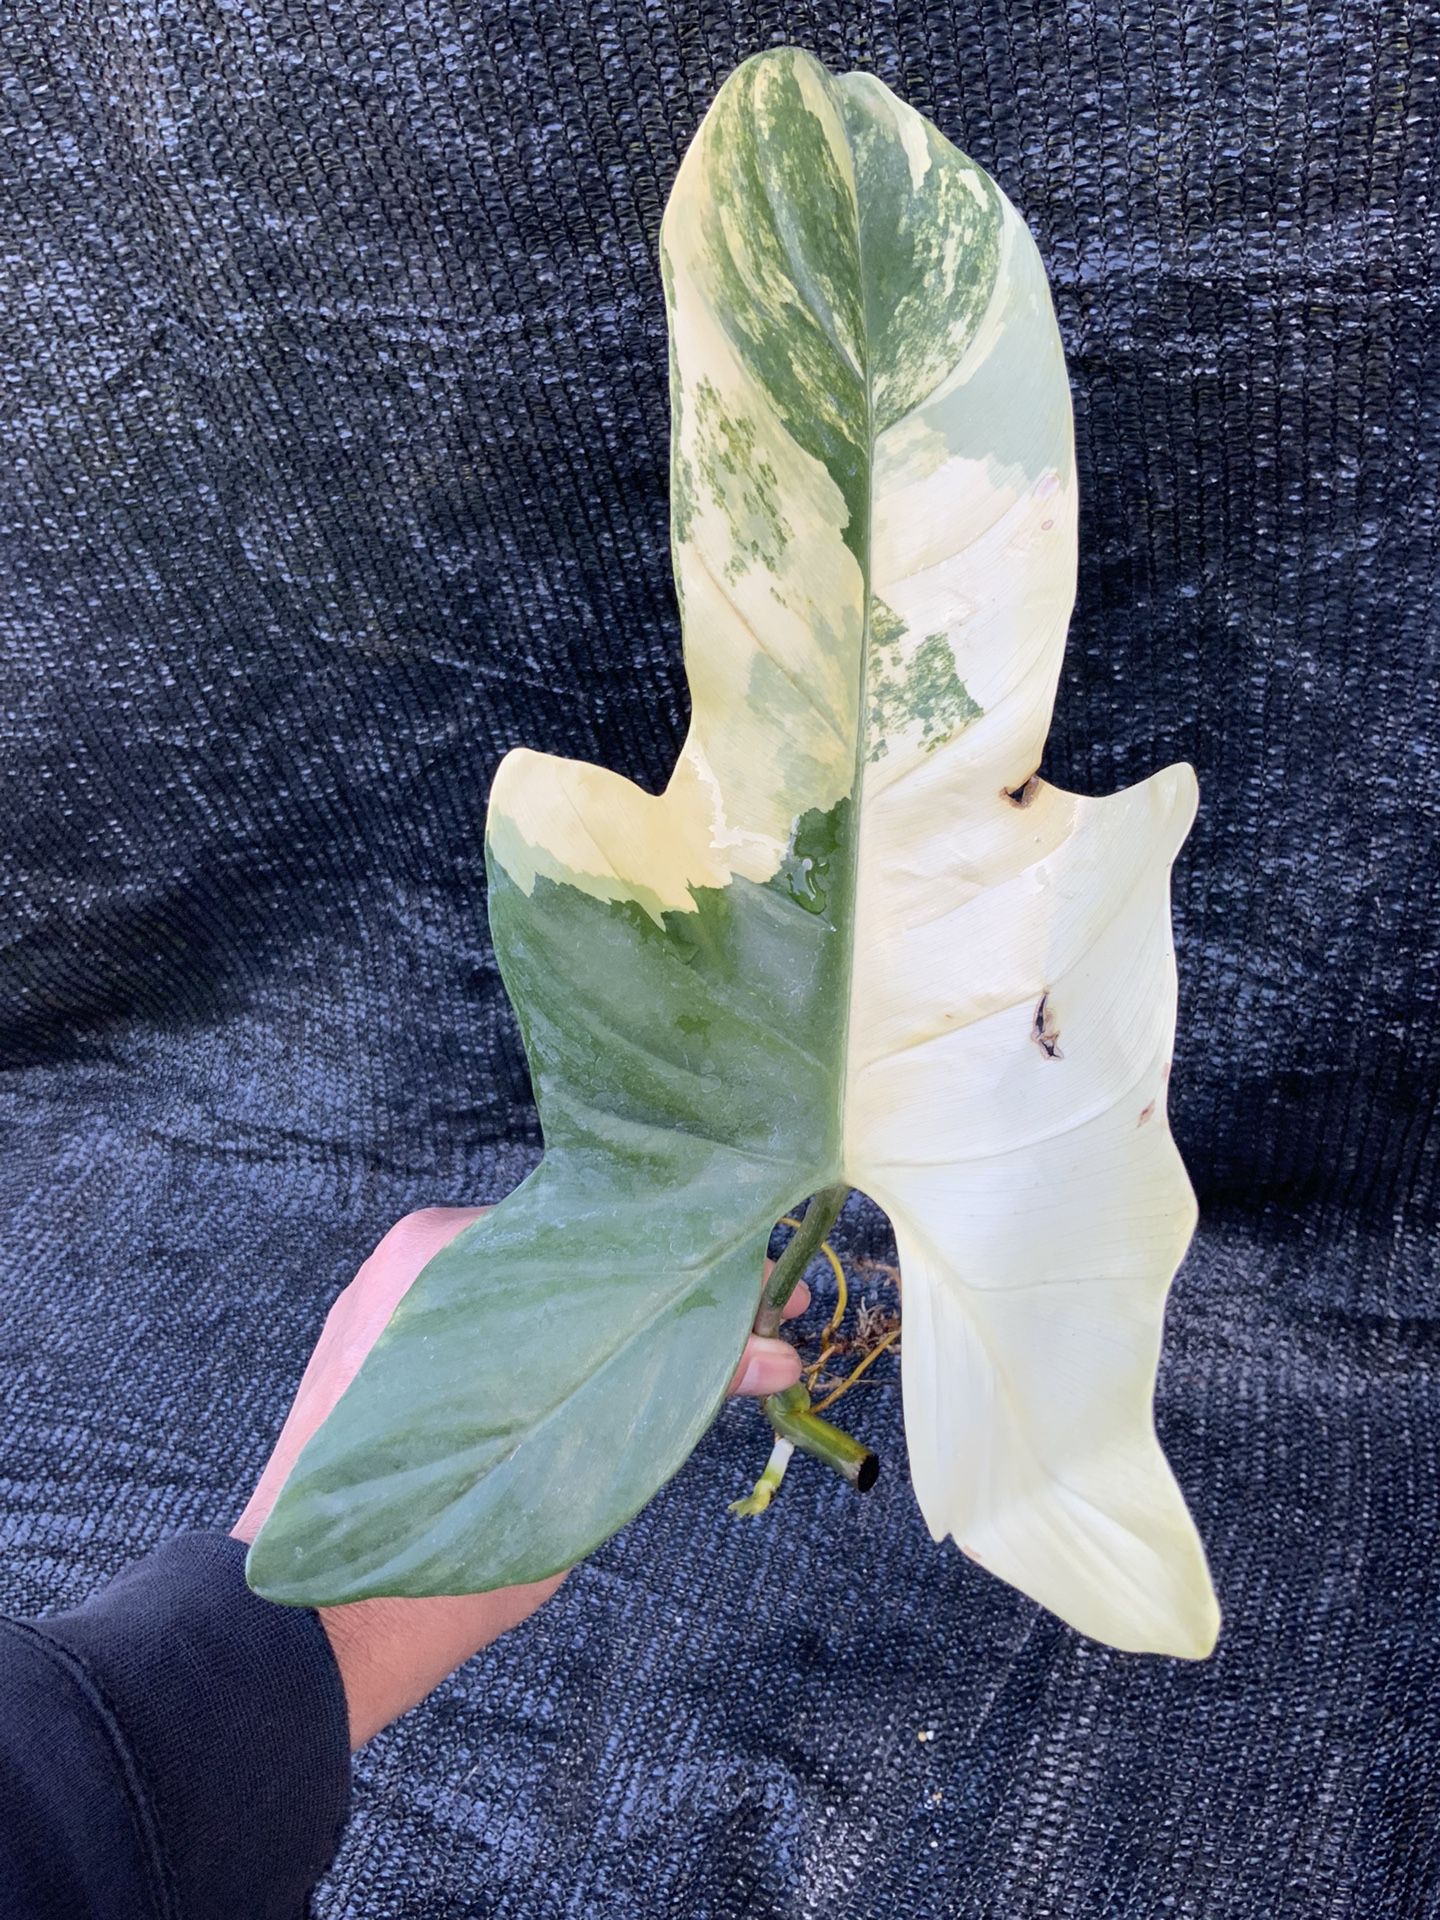 Philodendron Bipennifolium Variegated Violin Node Cutting Rooted With New Growth 